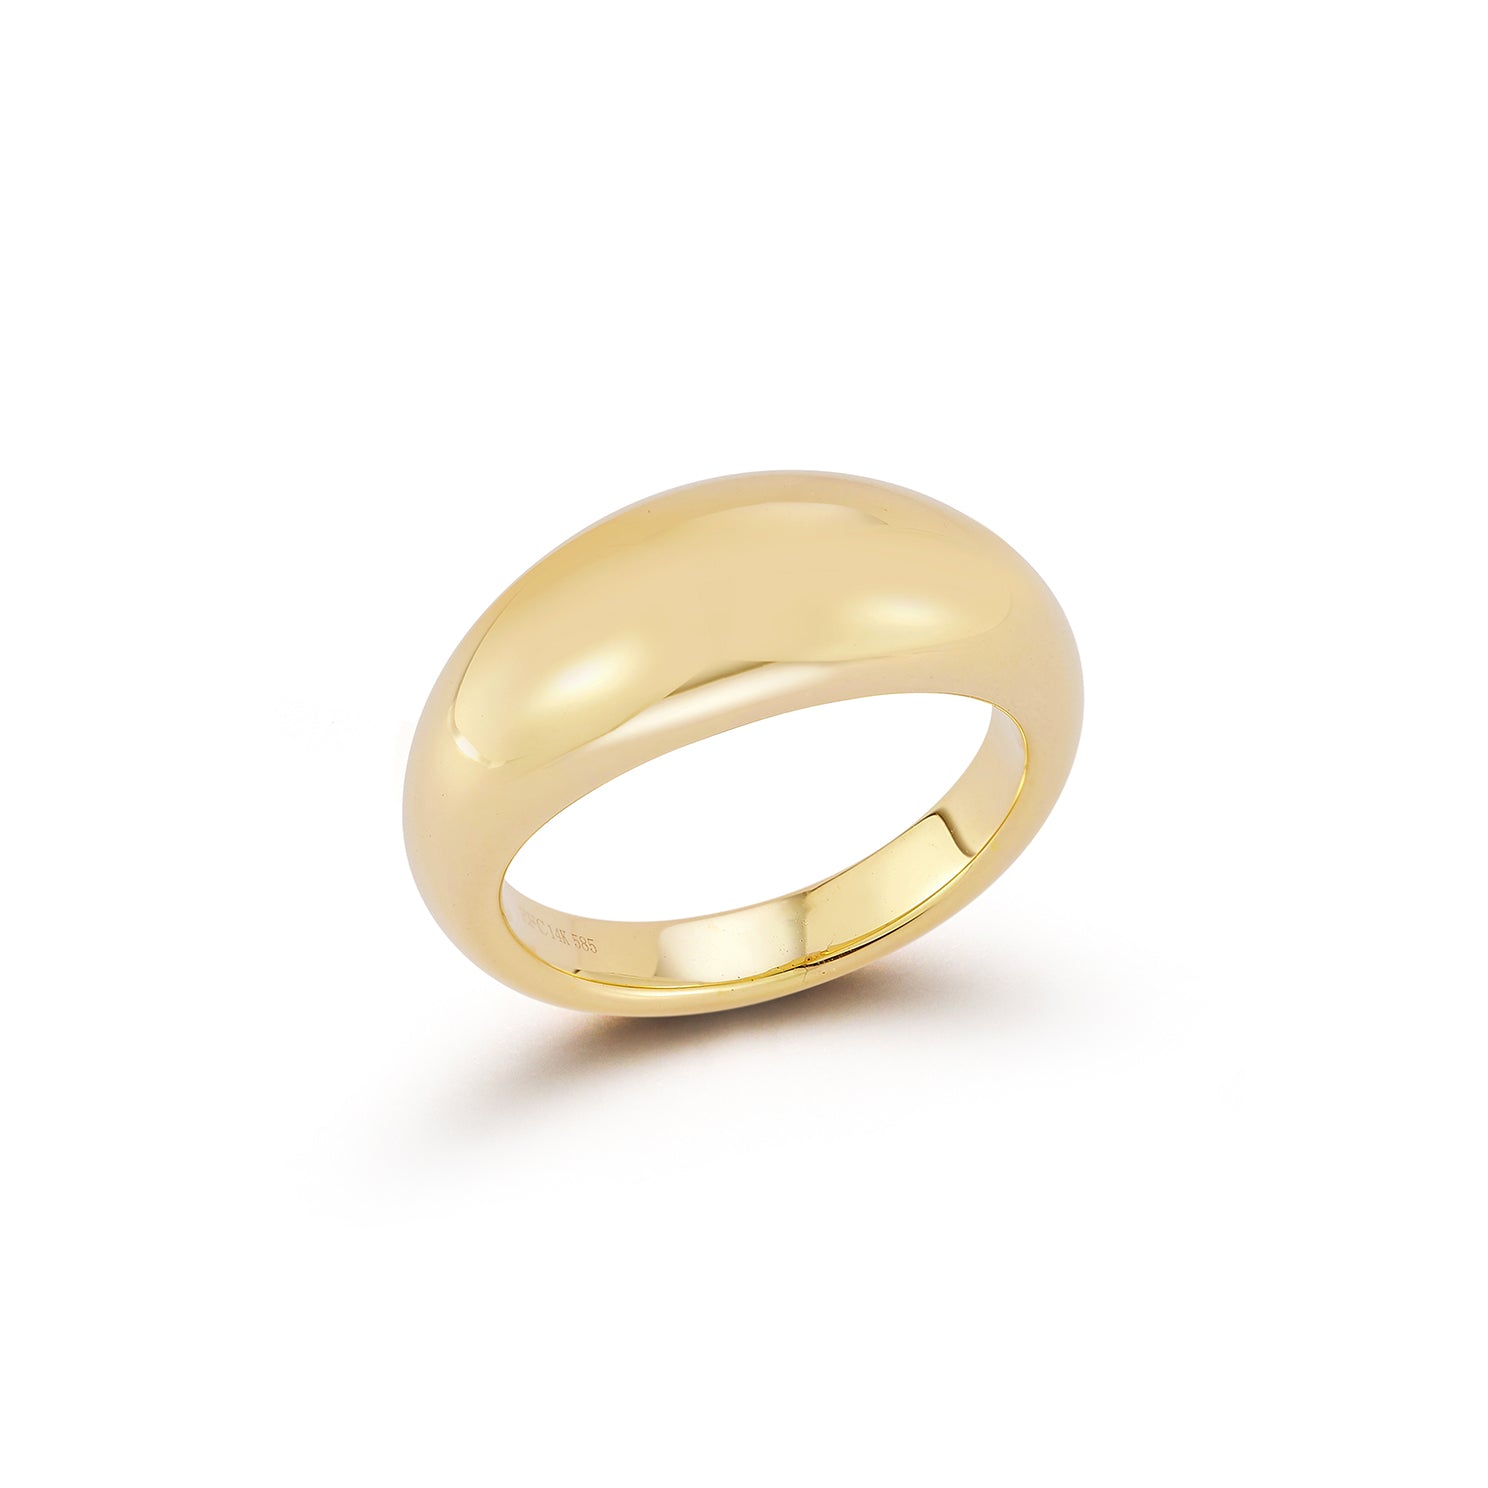 Gold Jumbo Dome Ring in 14k yellow gold